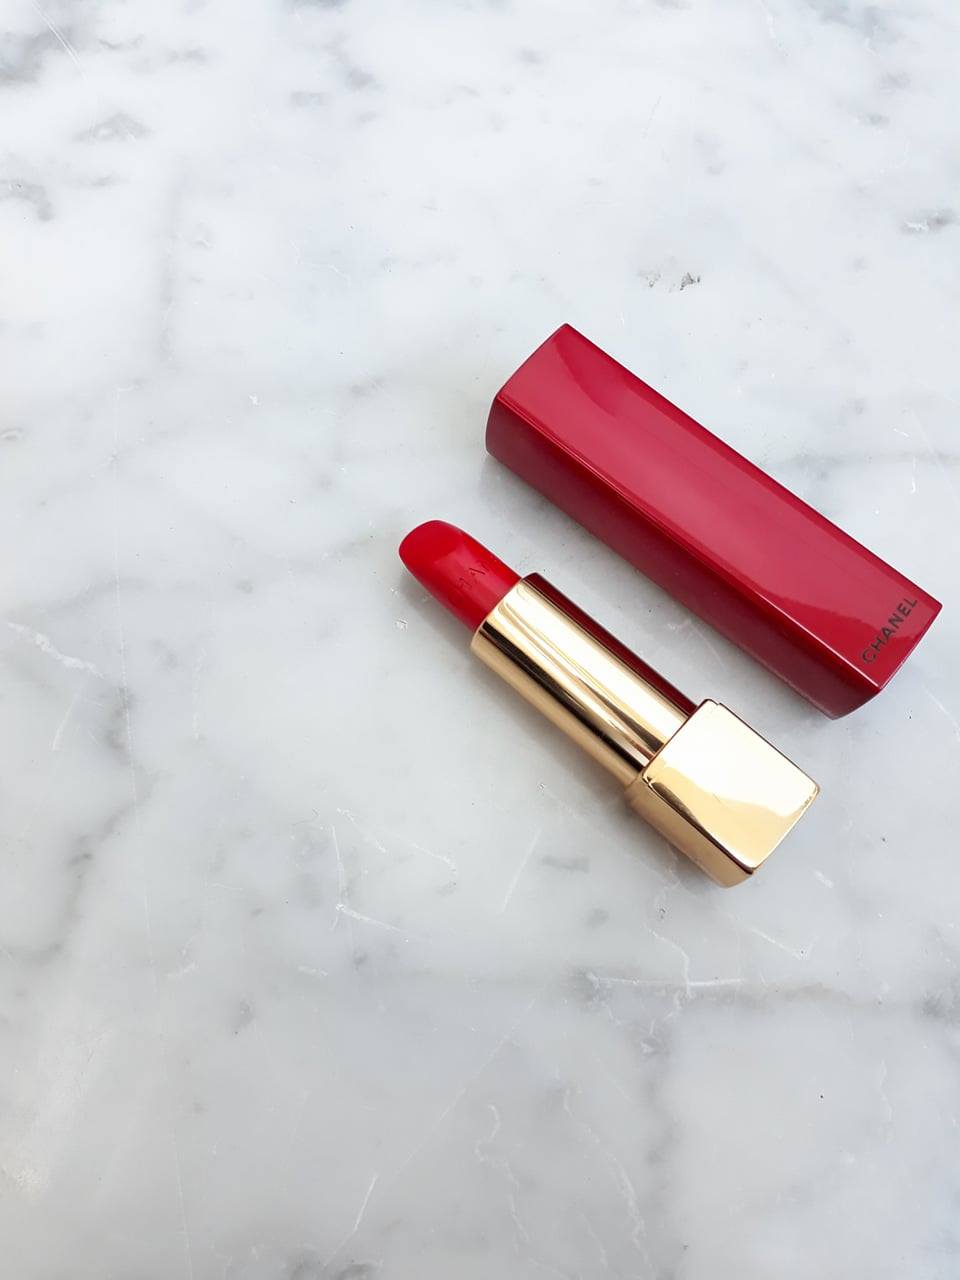 Chanel's Collection Libre 2017 Numeros Rouges: Rogue Allure N°4